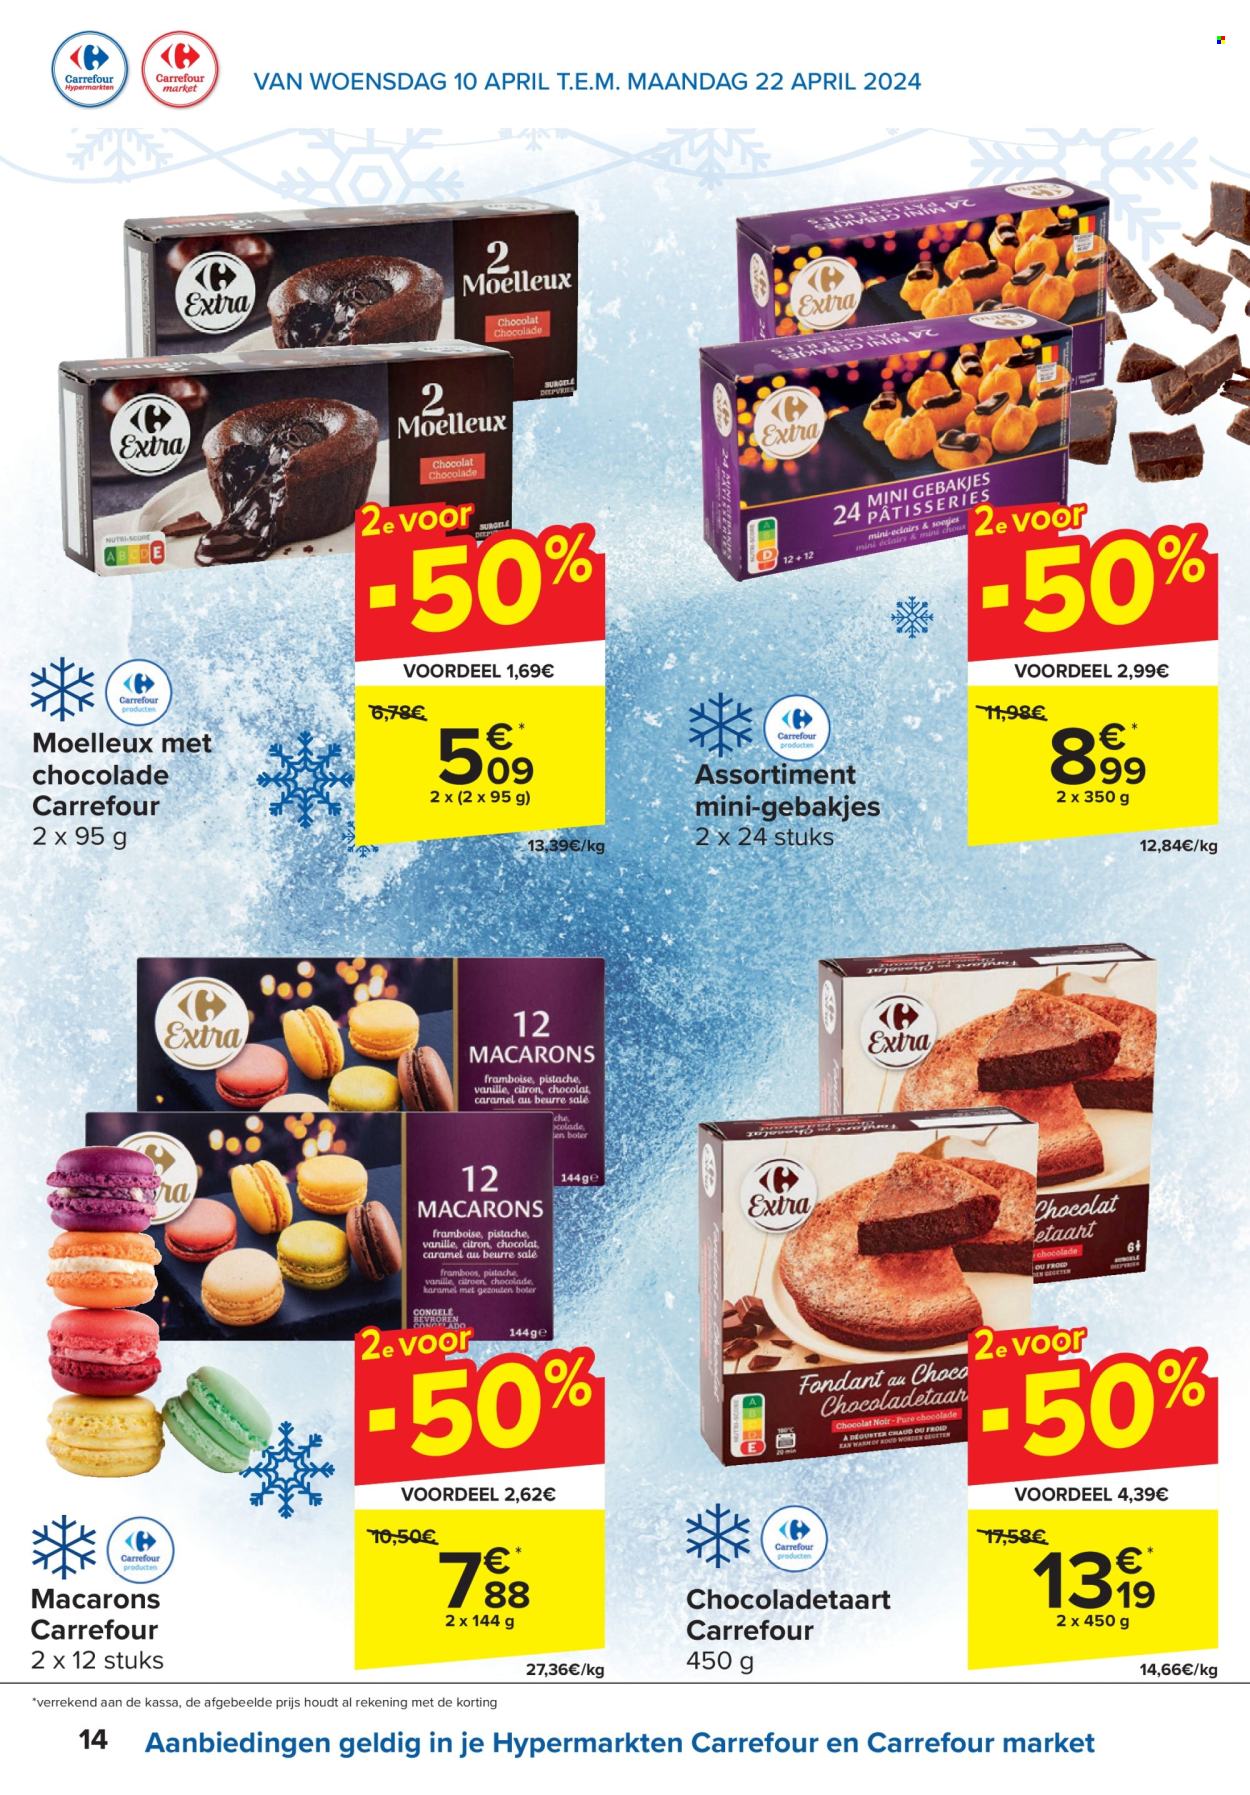 Catalogue Carrefour hypermarkt - 10.4.2024 - 22.4.2024. Page 14.